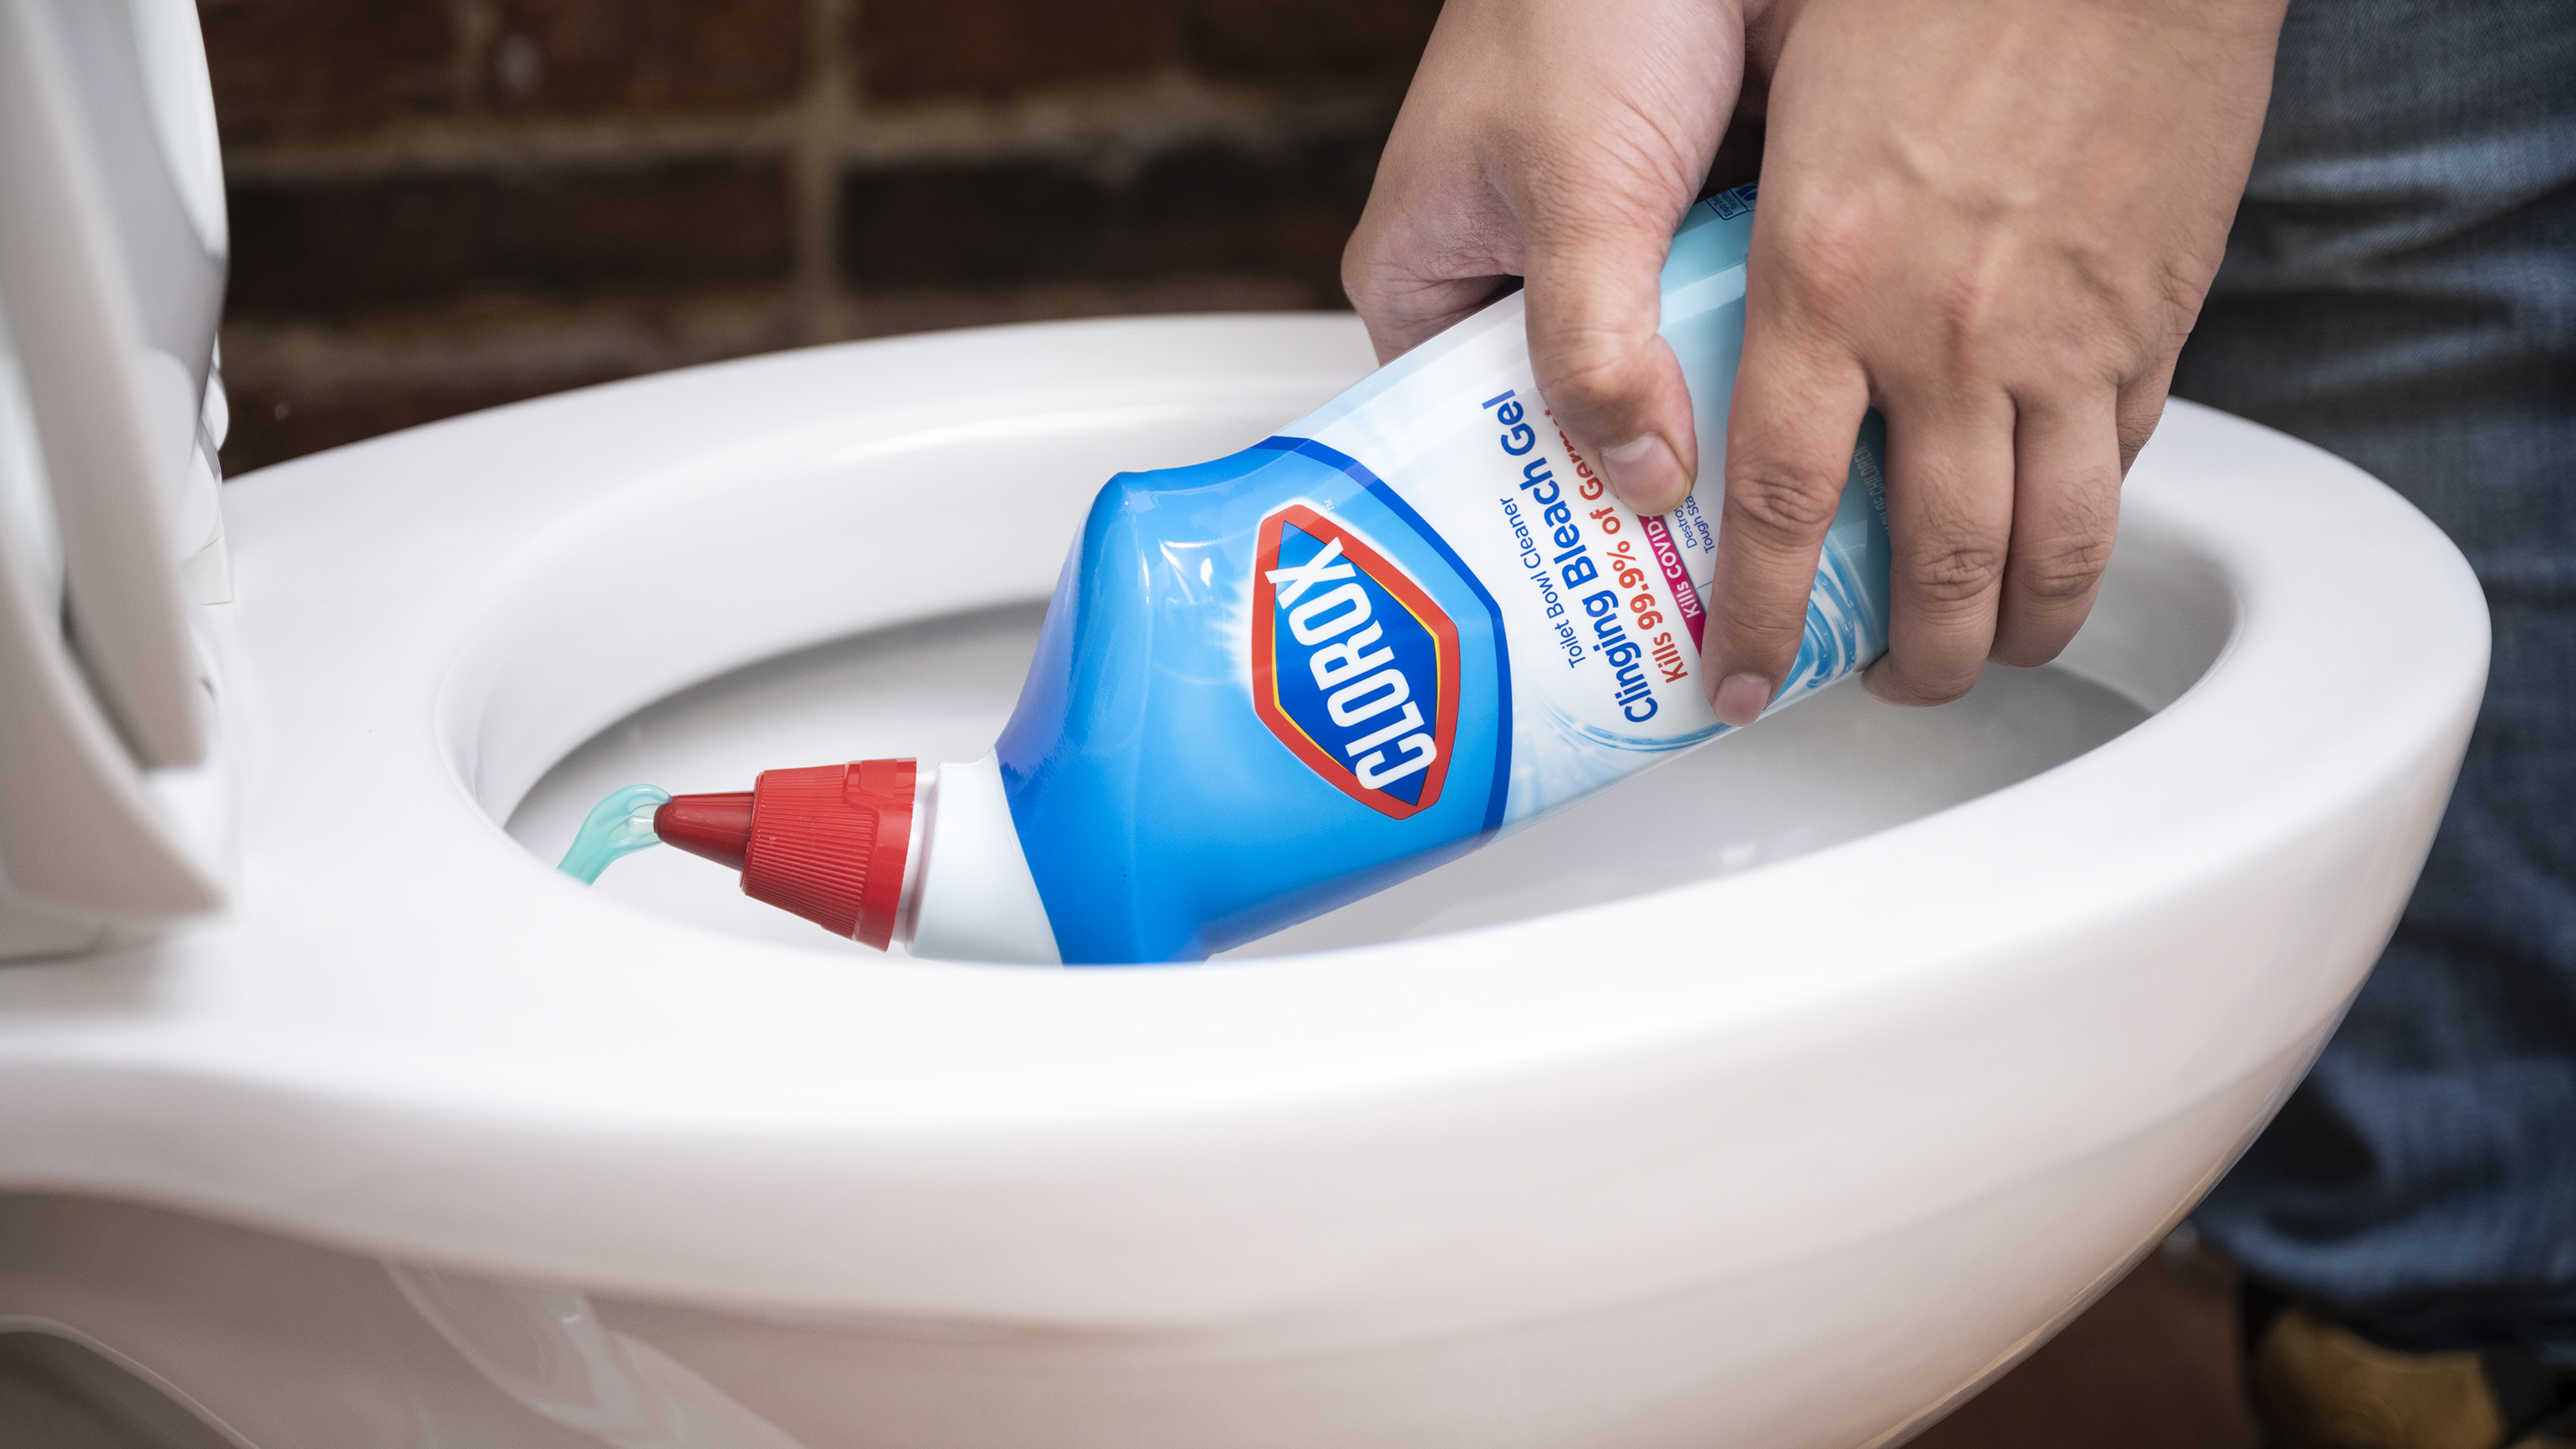 A person squirts liquid cleaner into the bowl of a toilet